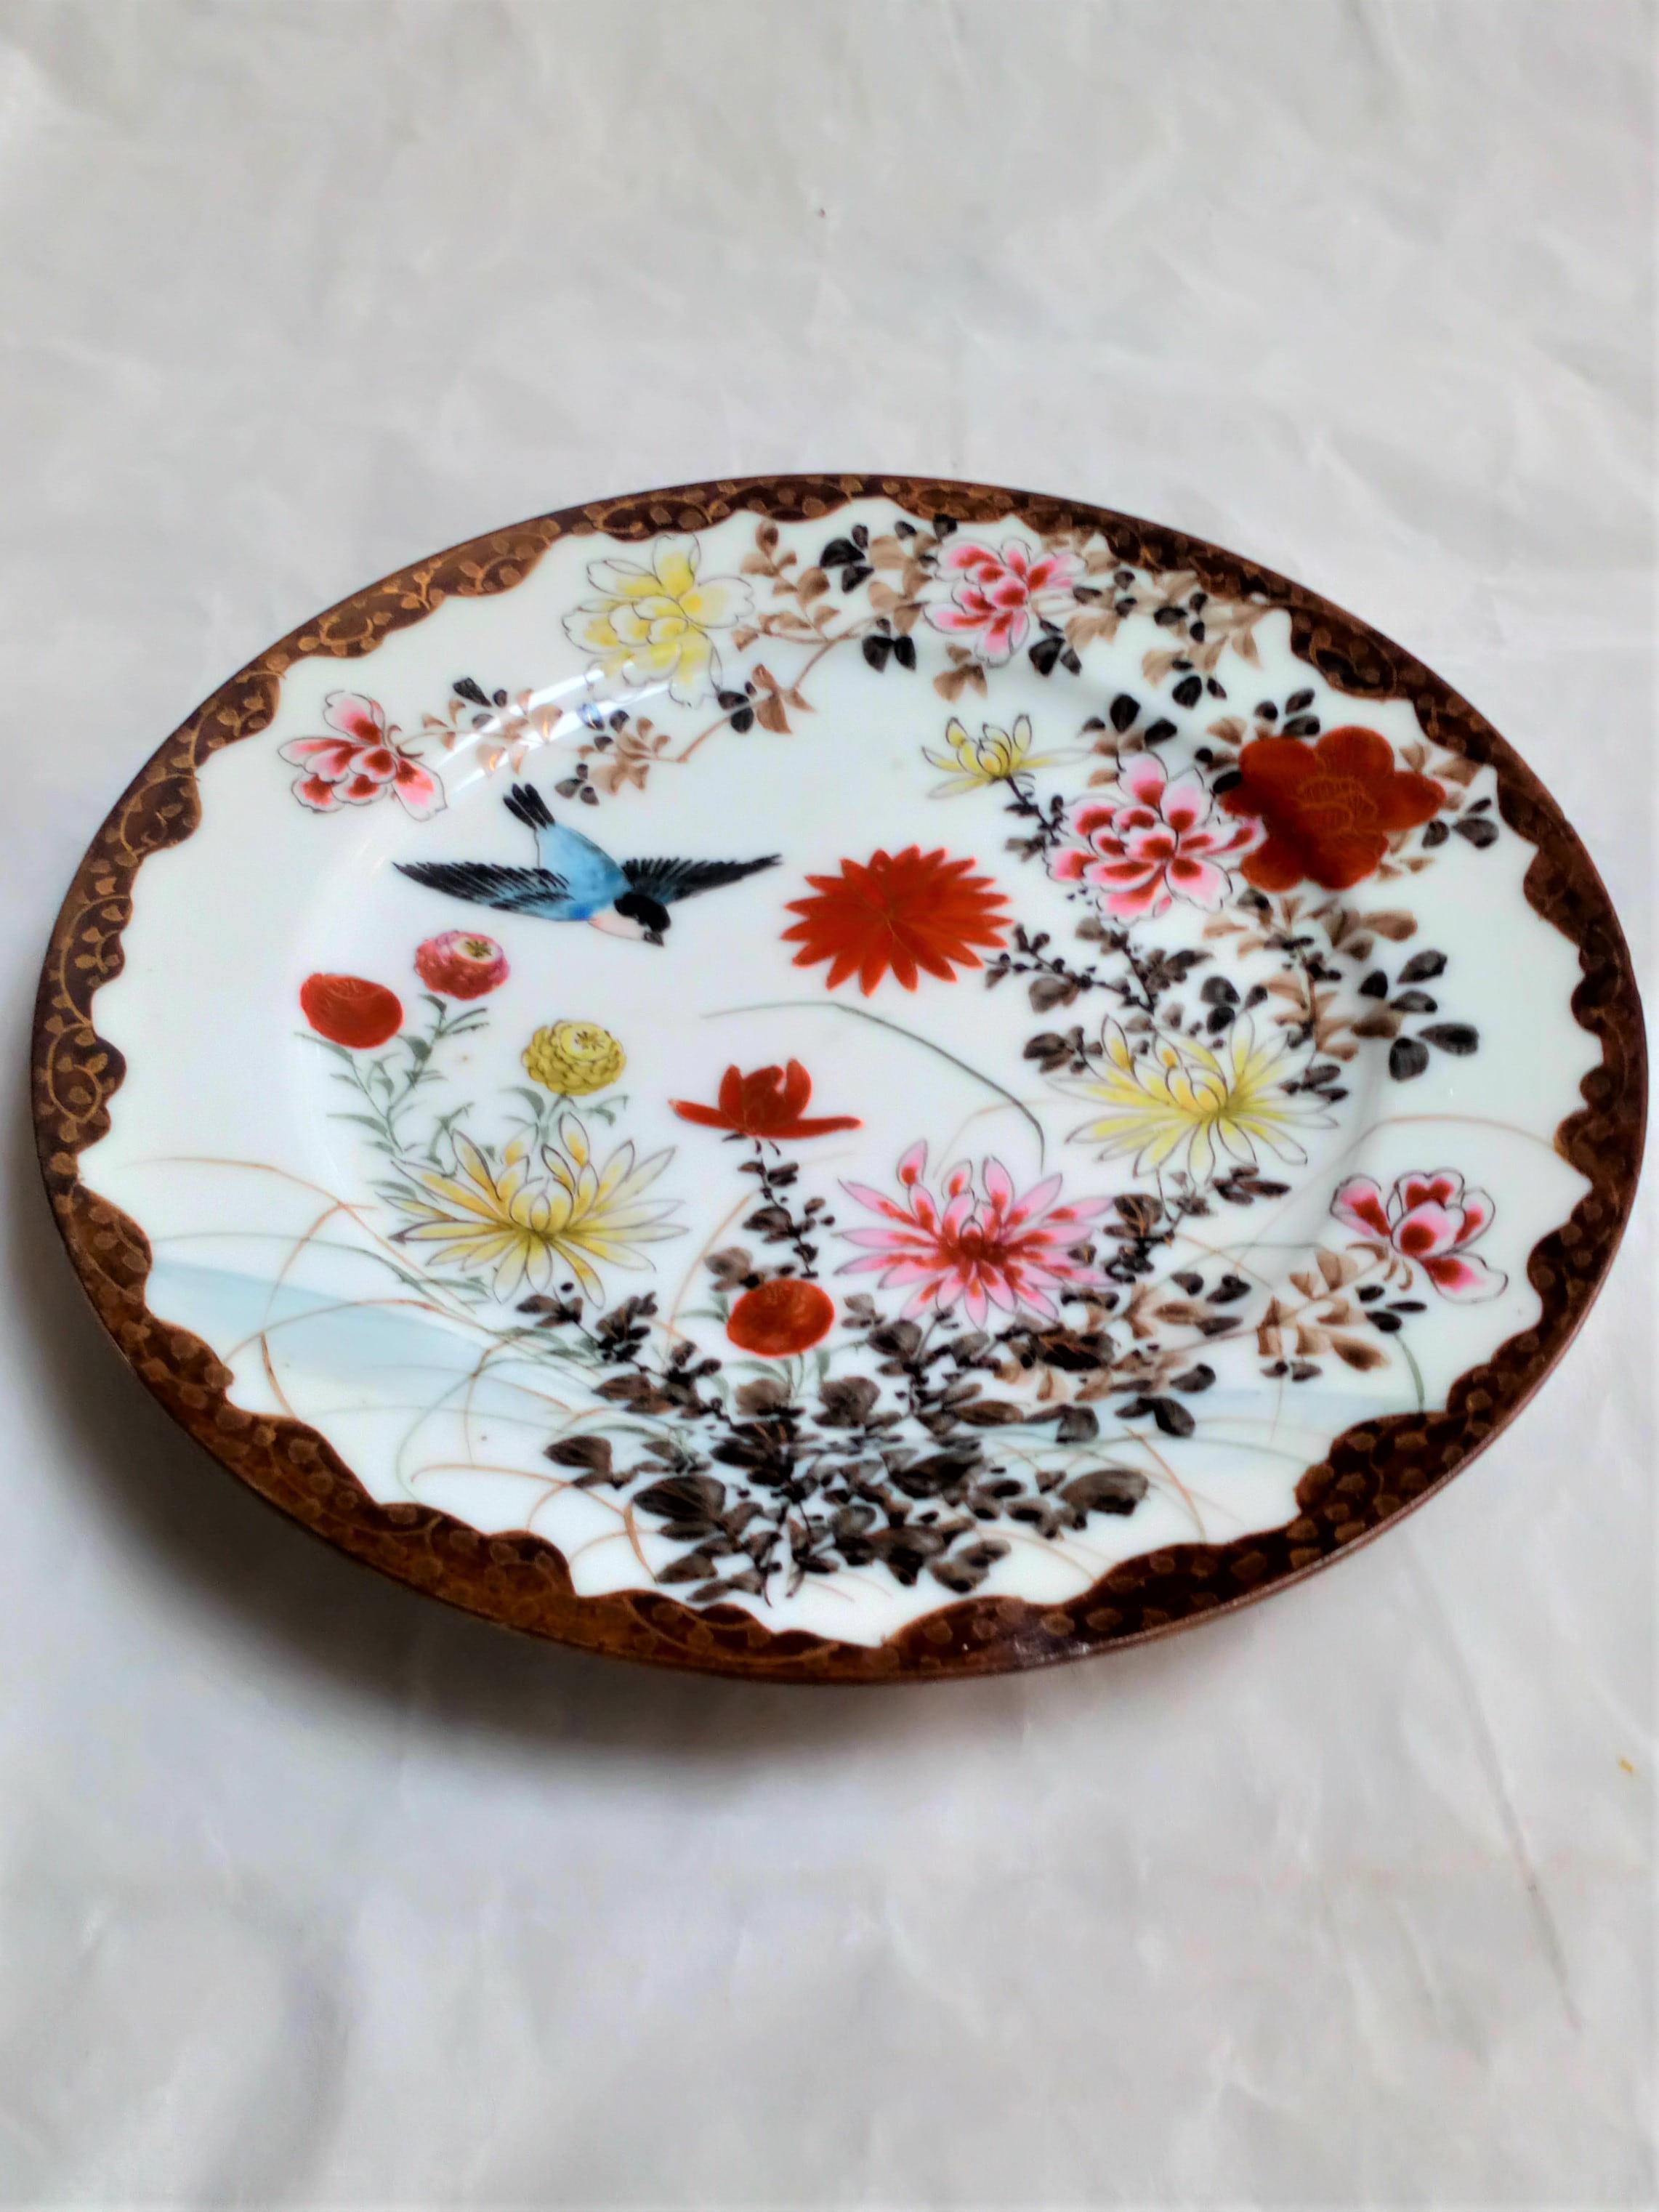 Antique Japanese Porcelain Plate Painted Birds and flowers marked 伊藤製 Ito sei  made by Ito from the Meiji circa 1900